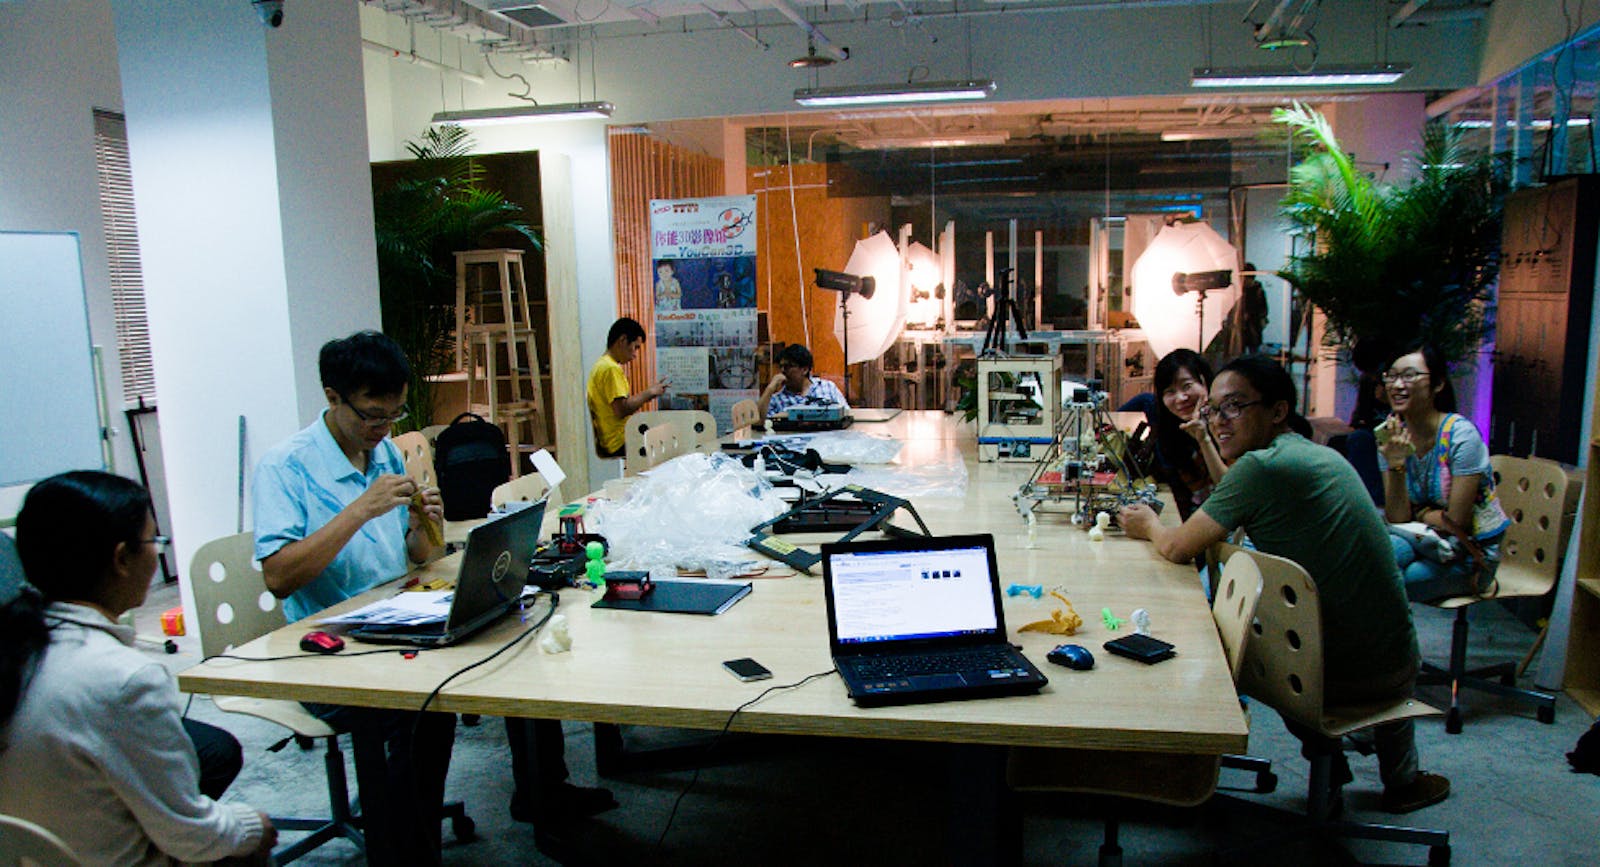 Attendees at technology workspace Makerspace in Beijing. Source: Mitch Altman